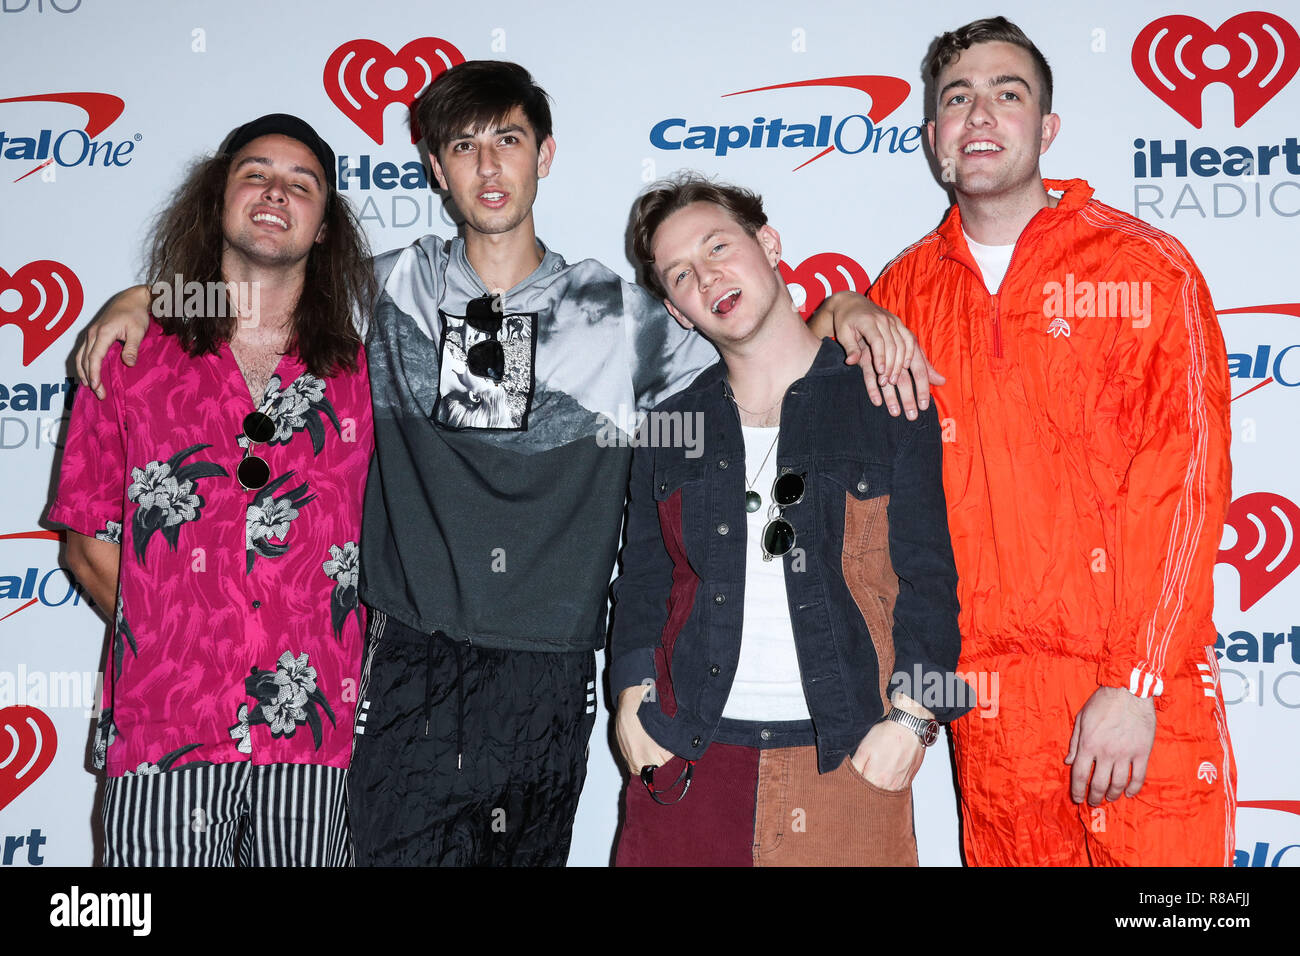 LAS VEGAS, NV, USA - SEPTEMBER 21: Sam Thomson, Shaan Singh, Matt Beachen, Ben O'Leary, Drax Project in the press room during the 2018 iHeartRadio Music Festival - Night 1 held at T-Mobile Arena on September 21, 2018 in Las Vegas, Nevada, United States. (Photo by Xavier Collin/Image Press Agency) Stock Photo